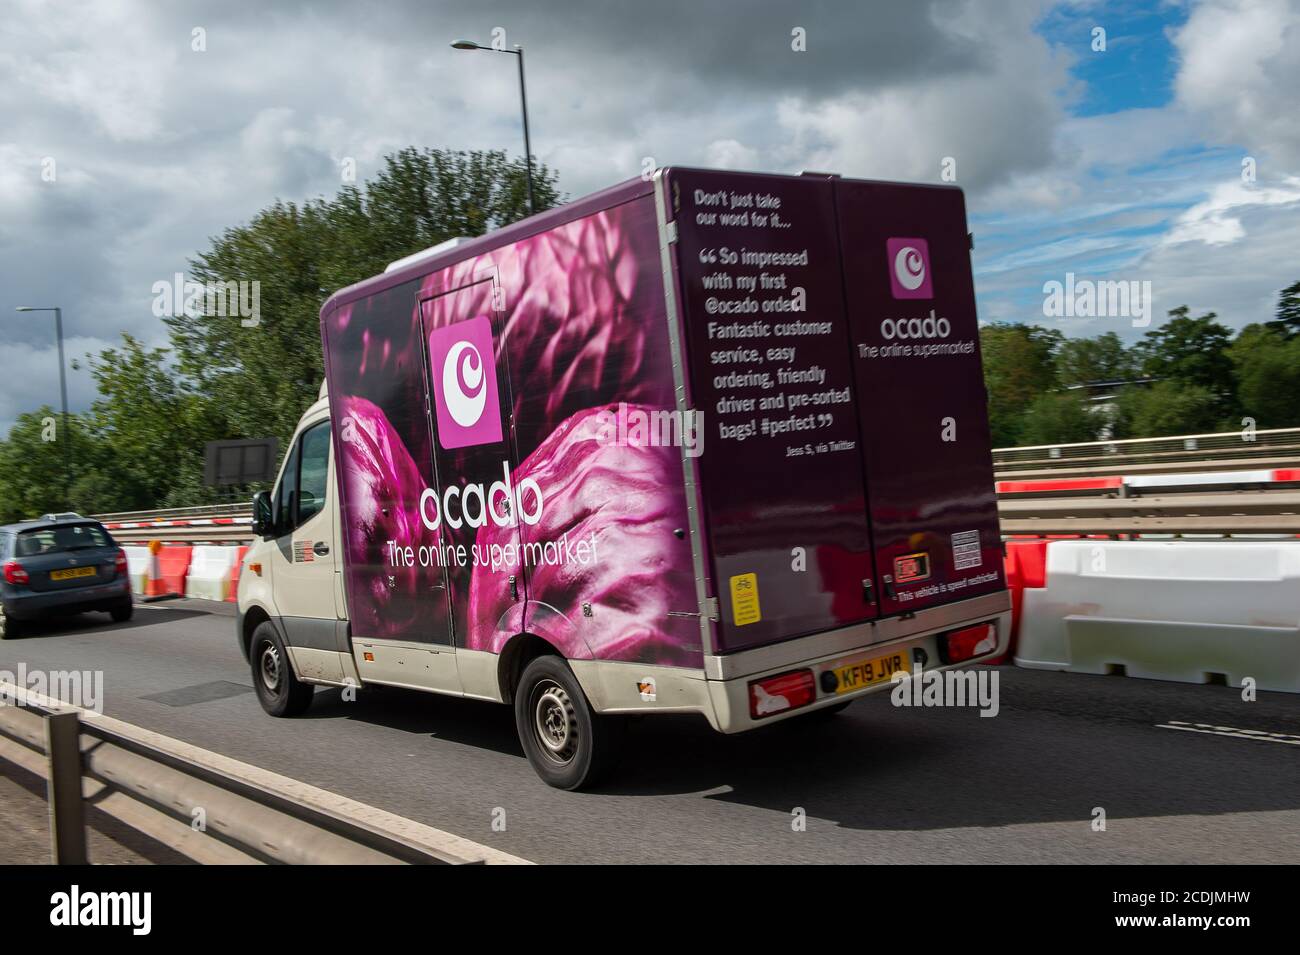 Windsor, Berkshire, UK. 28th August, 2020. From 1st September 2020, Ocado will start delivering M&S online food orders as their contract with Waitrose has ended. Credit: Maureen McLean/Alamy Stock Photo